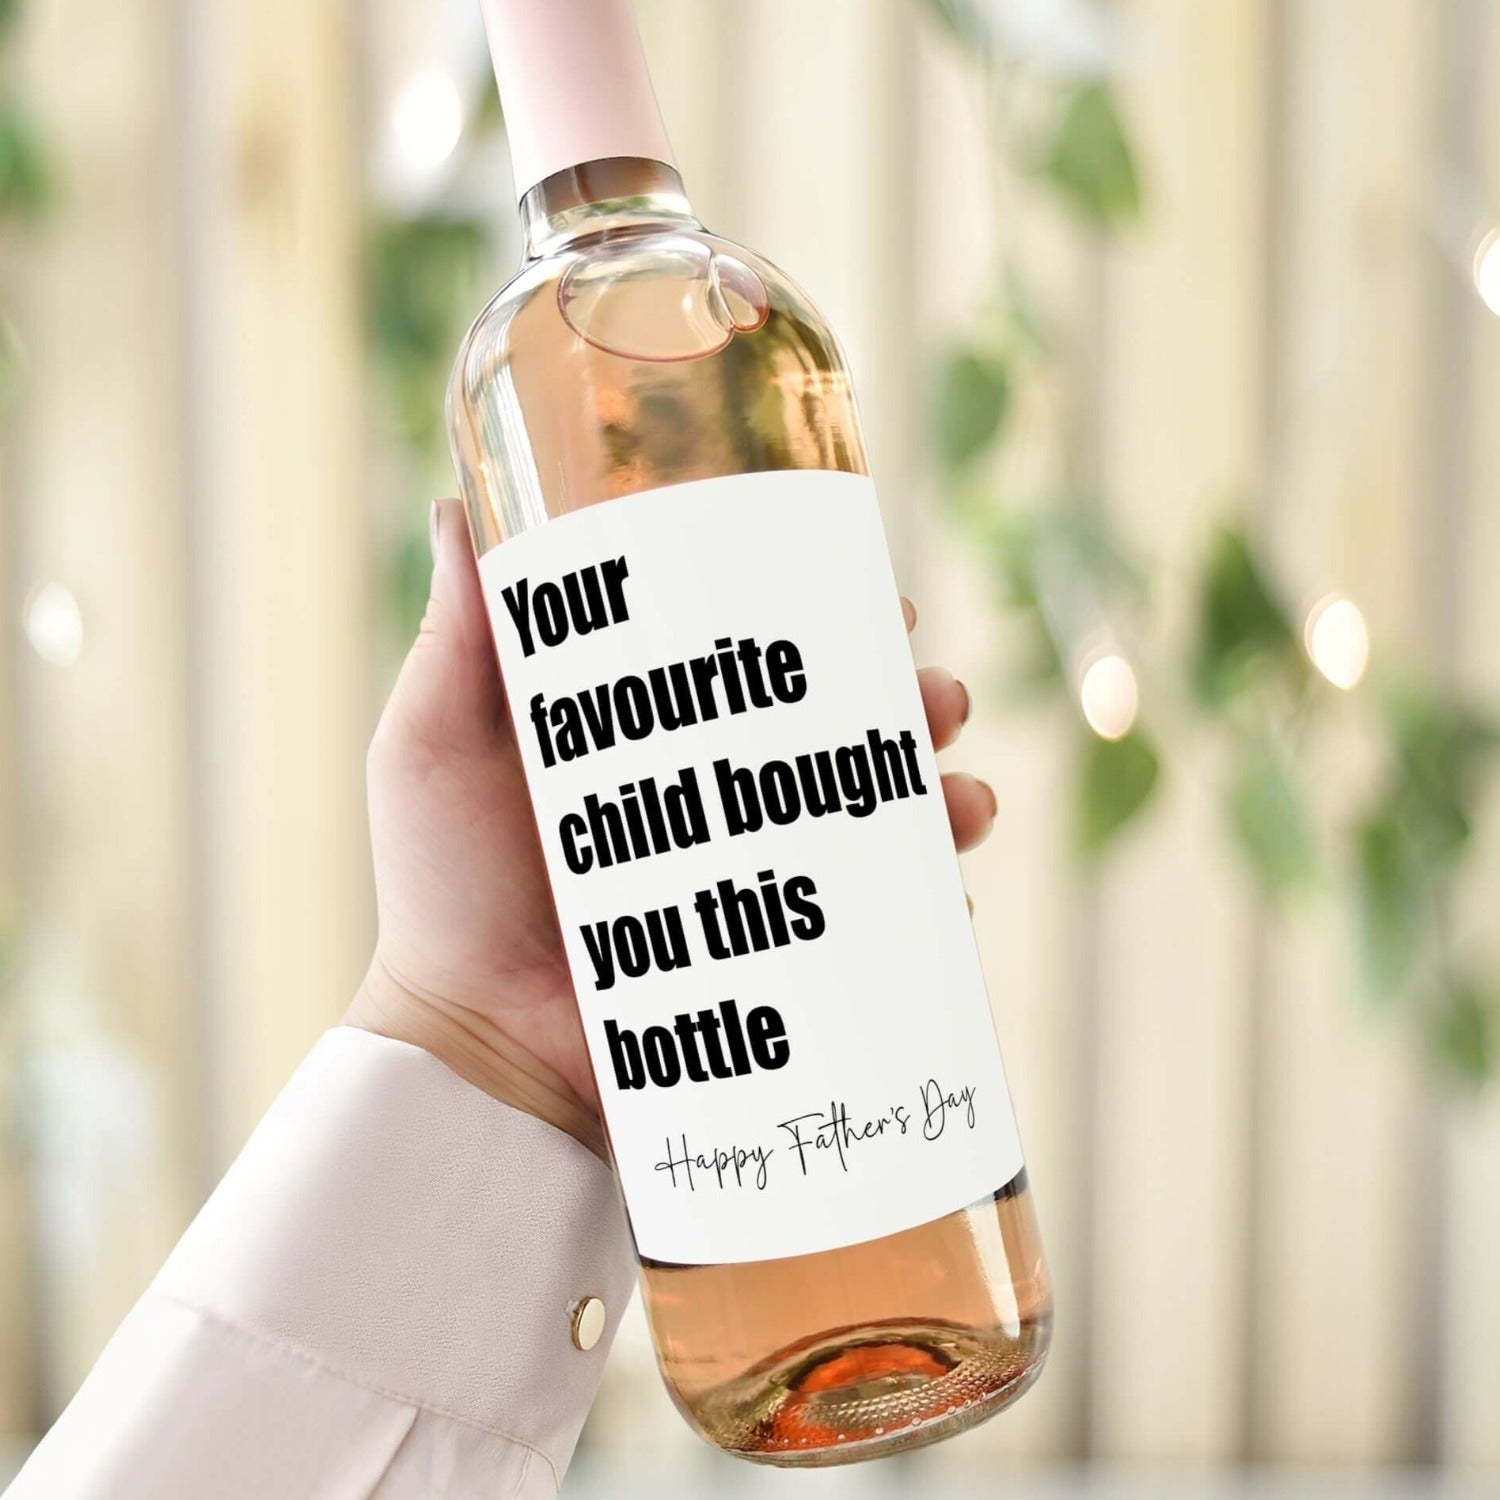 your favourite child bought you this bottle wine label